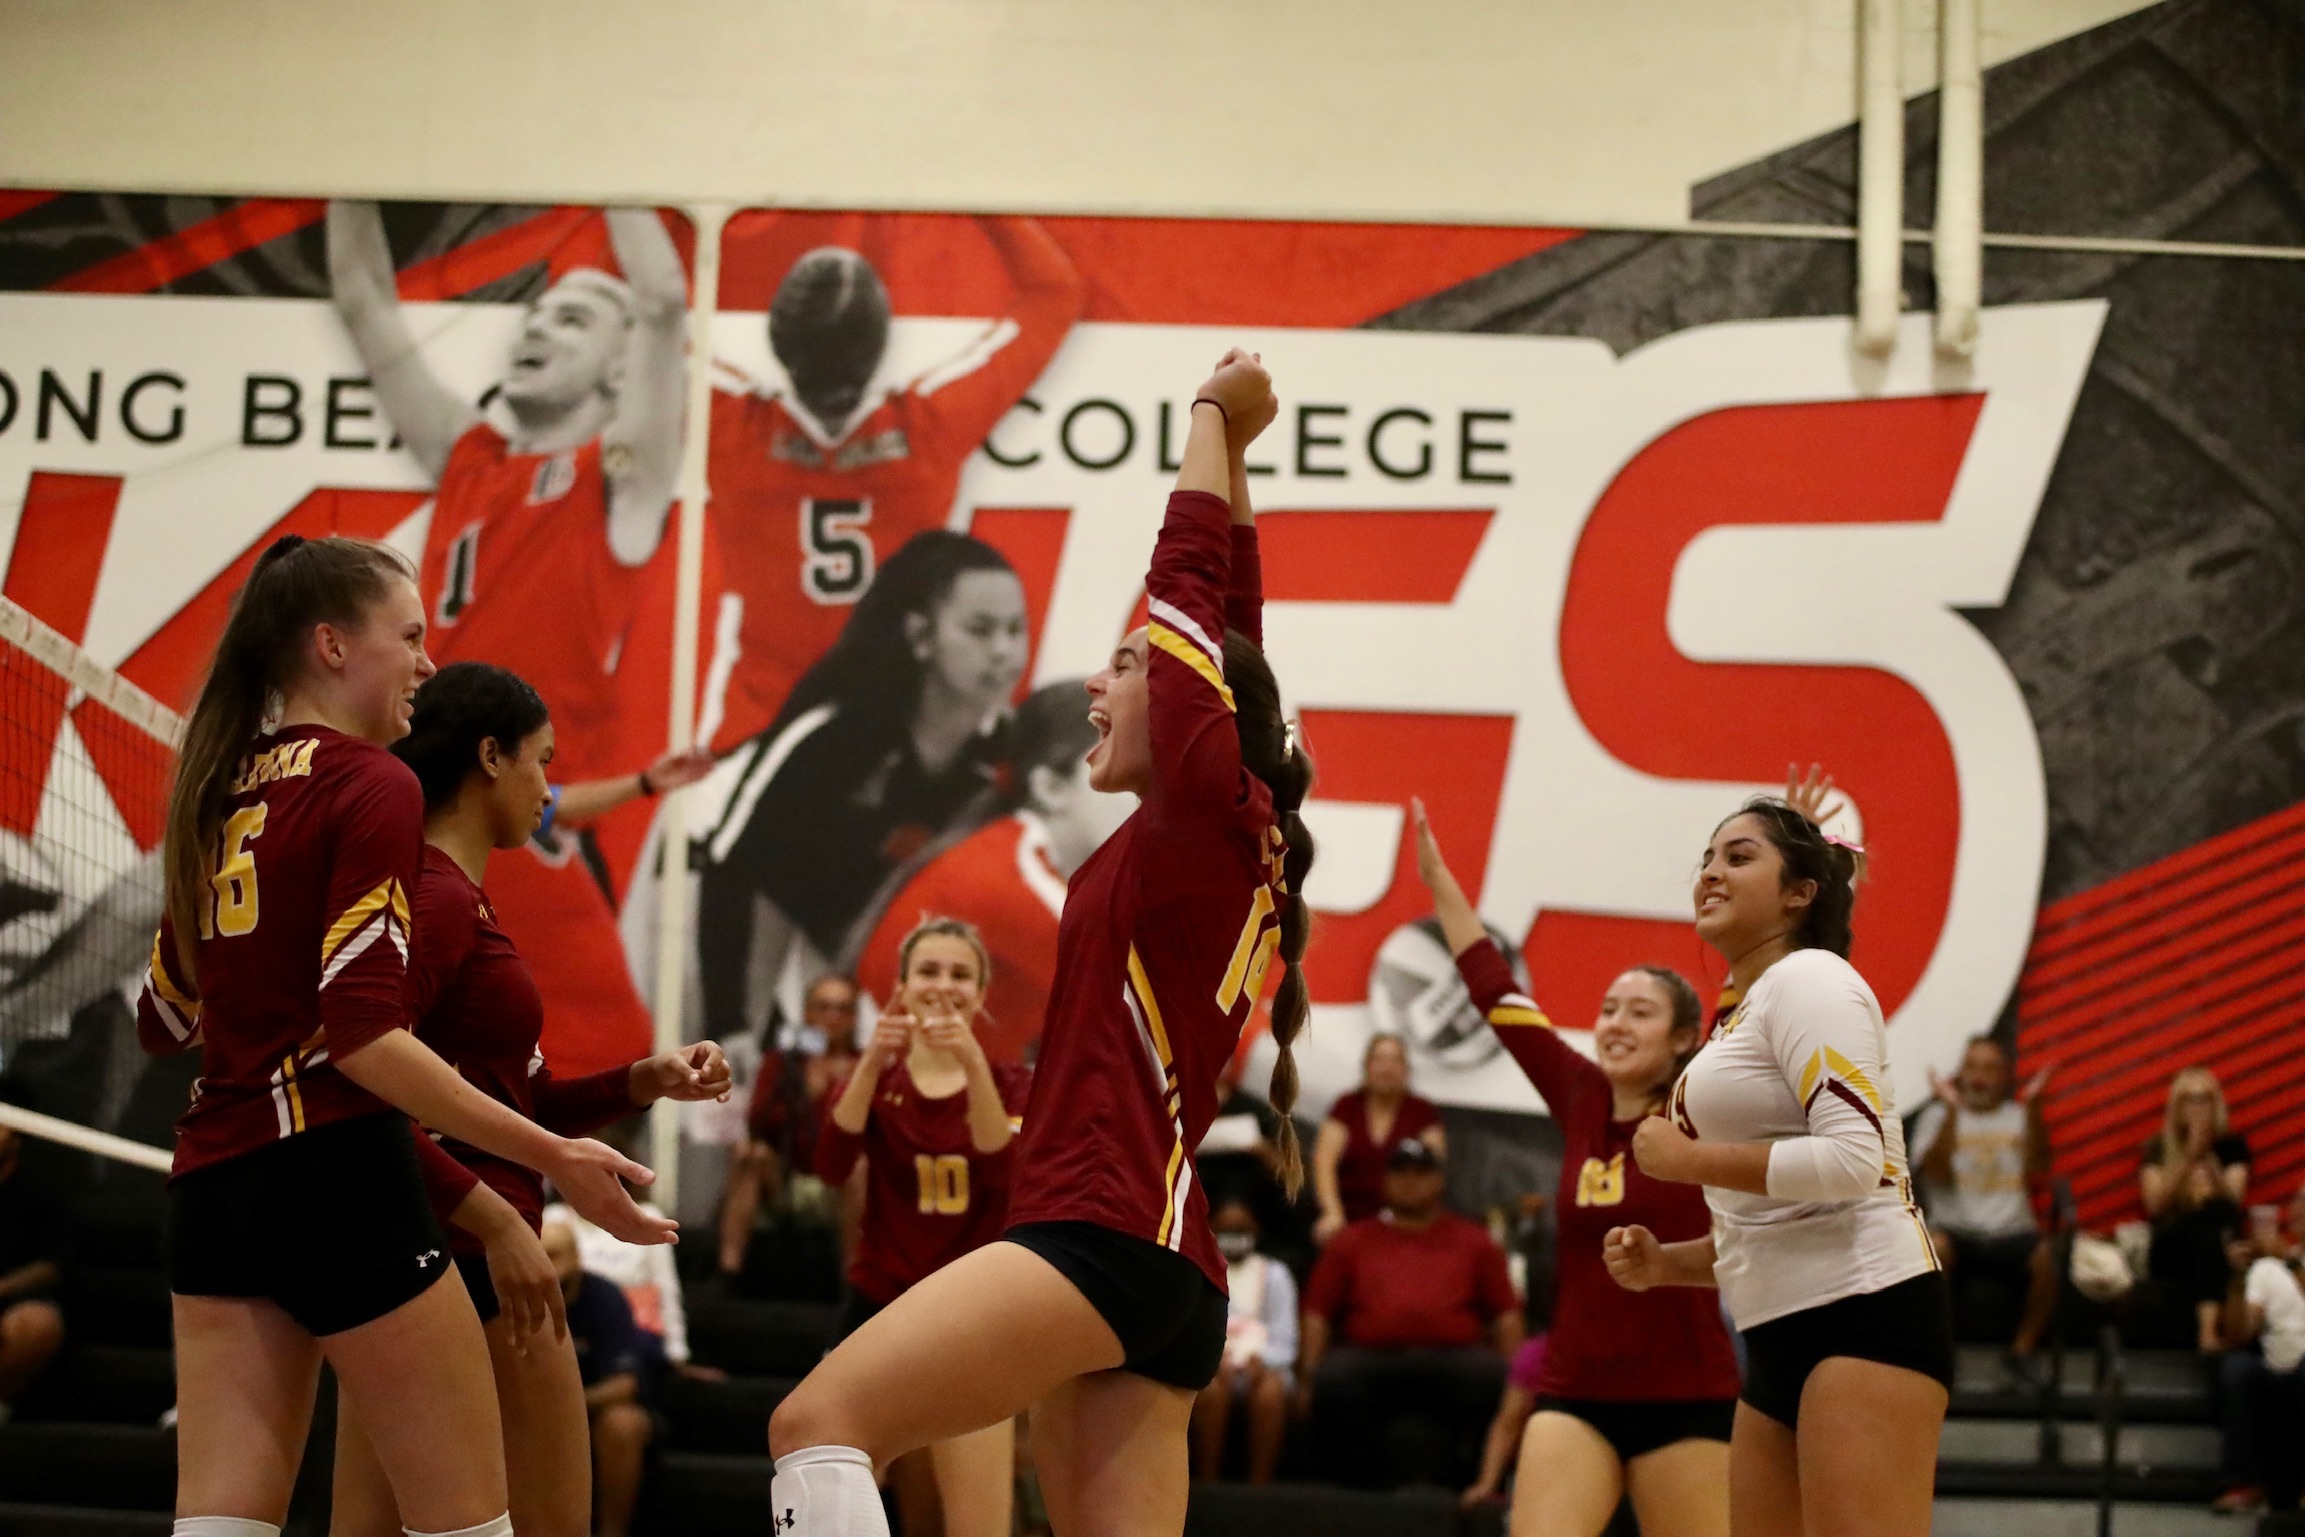 The Lancers celebrate a point at Long Beach's Hall of Champions court in Friday's win (photo by Michael Watkins).